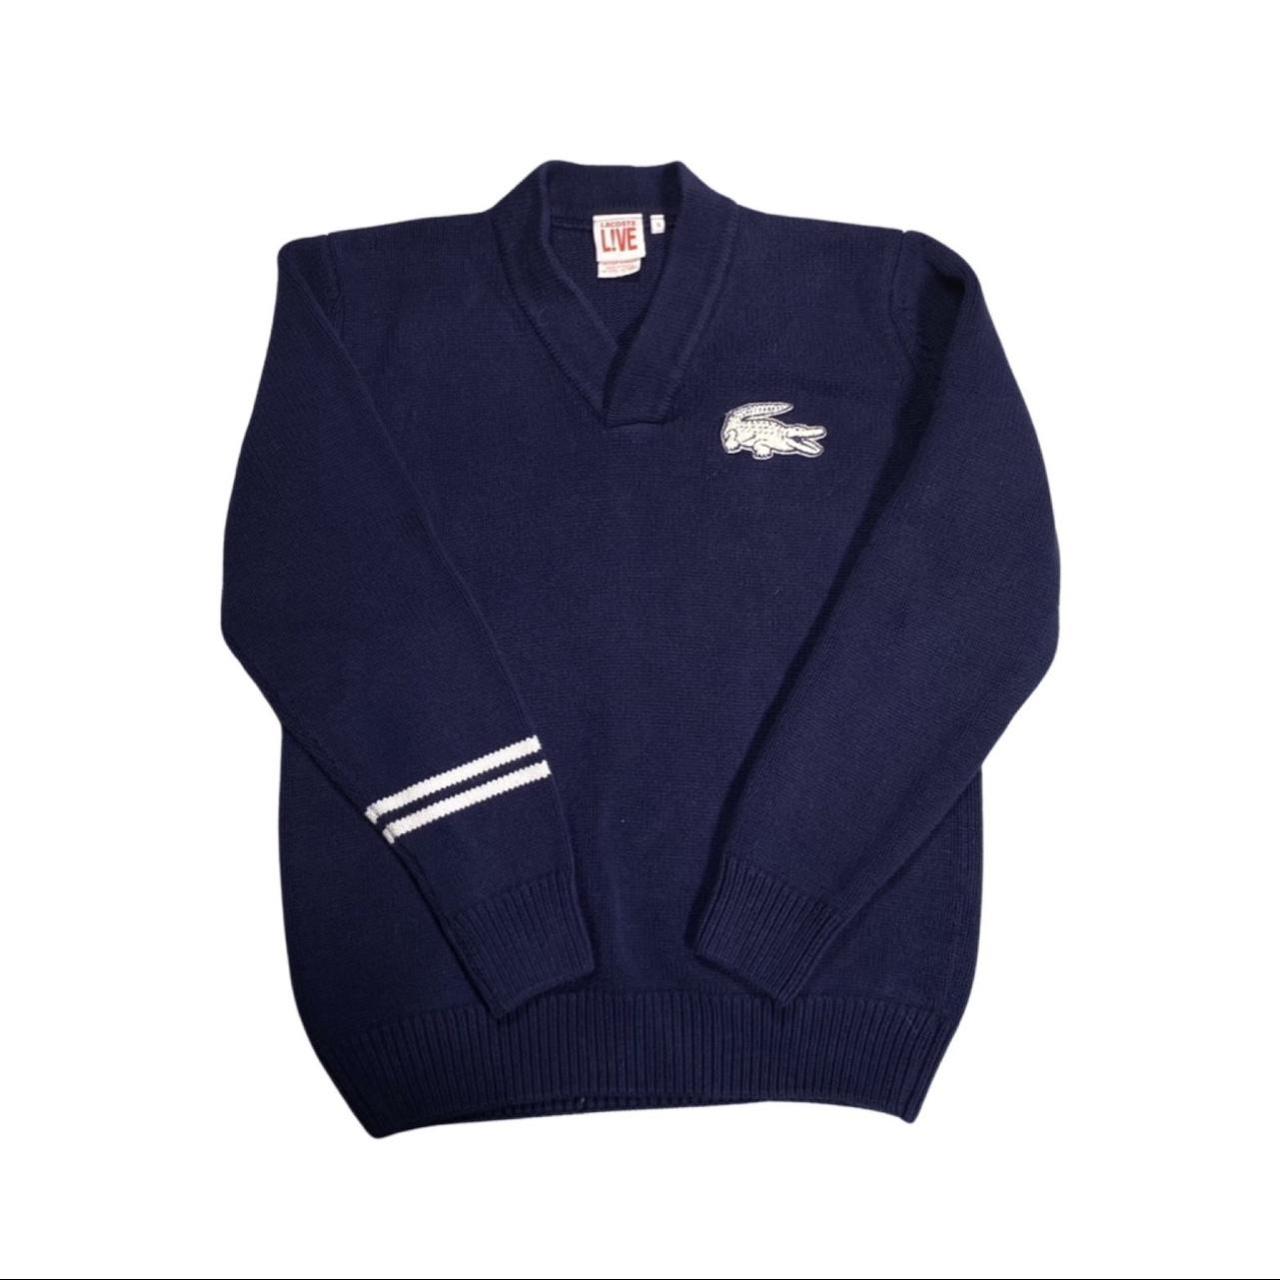 Lacoste Live Men's Blue and White Jumper